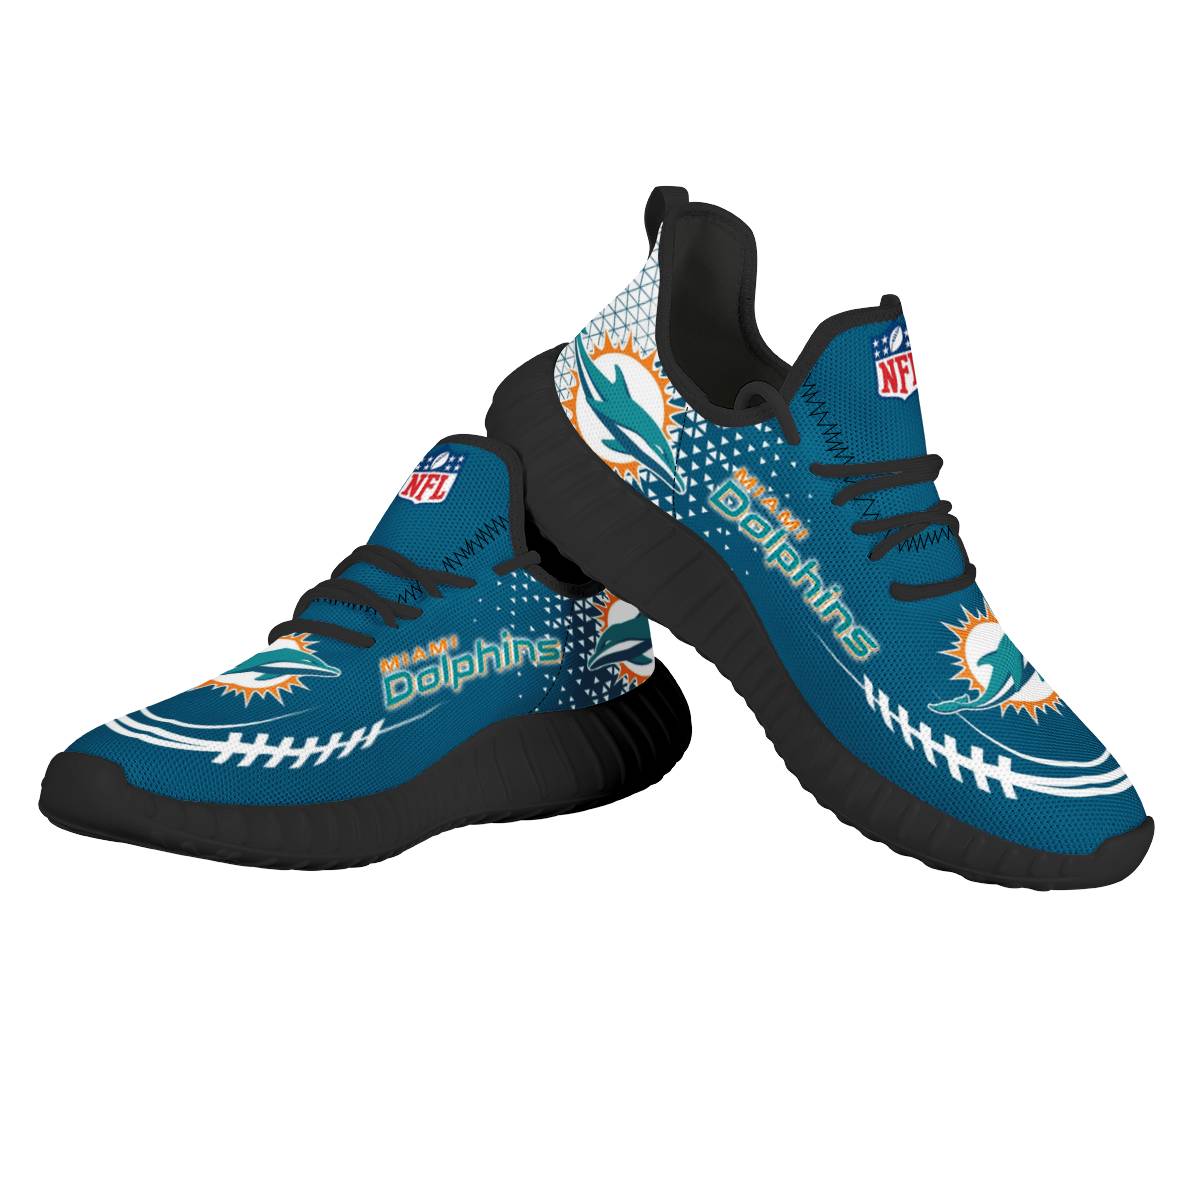 Men's NFL Miami Dolphins Mesh Knit Sneakers/Shoes 002